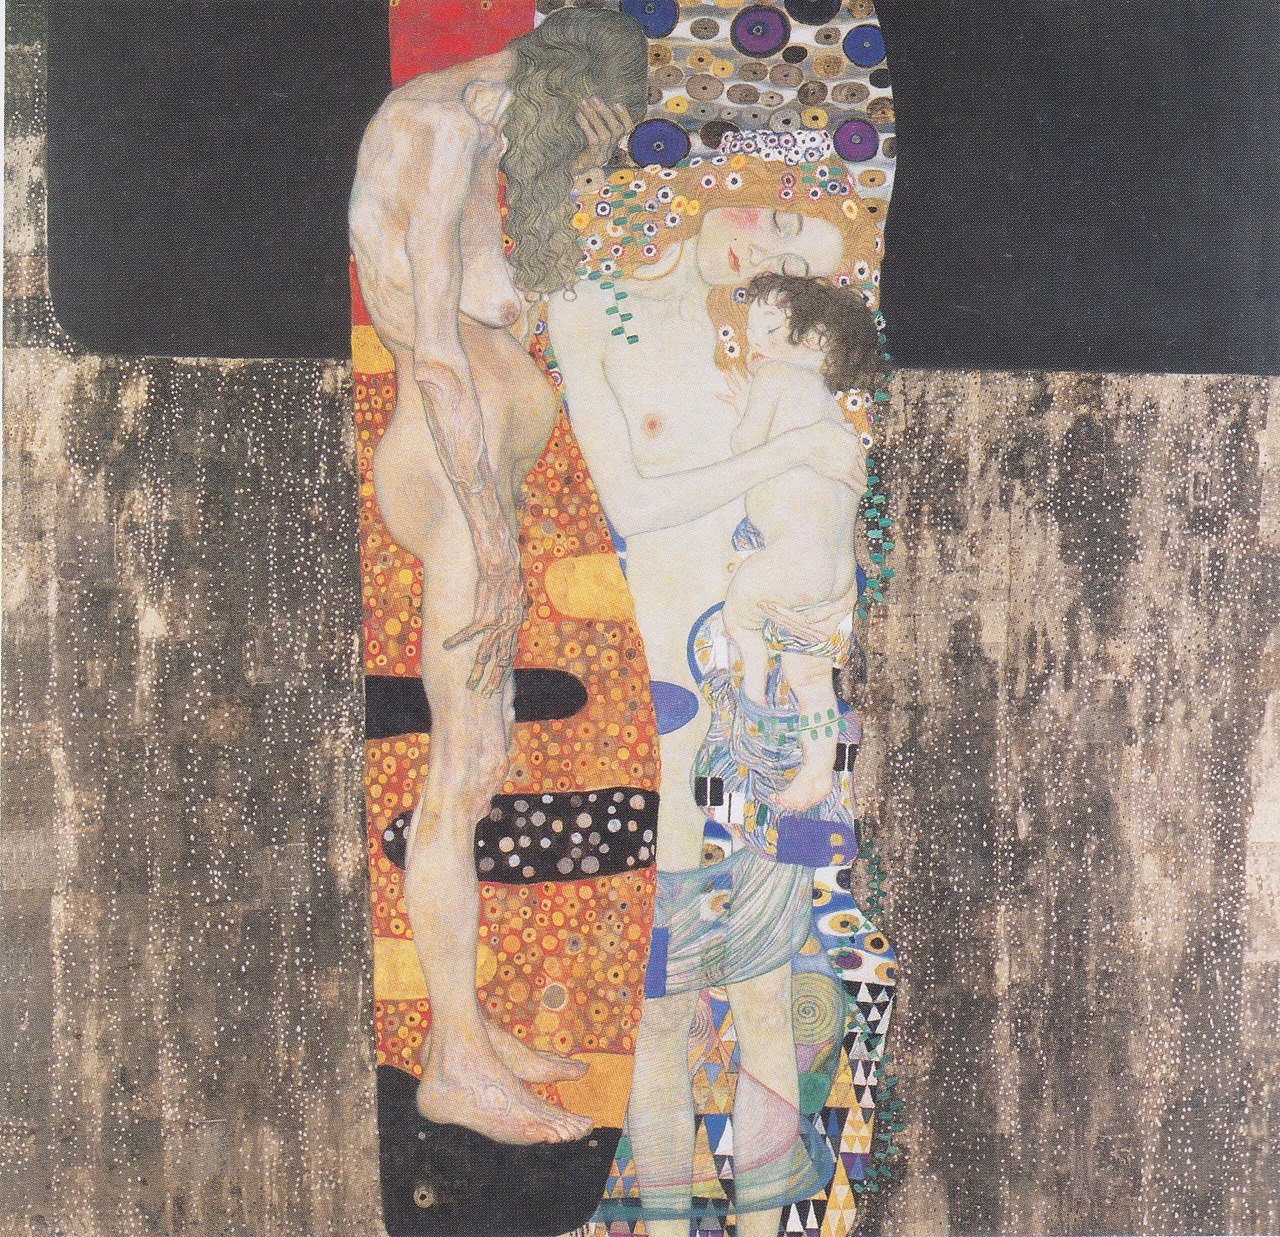 The Wick - 'The Three Ages of Woman' by Gustav Klimt, 1905.
